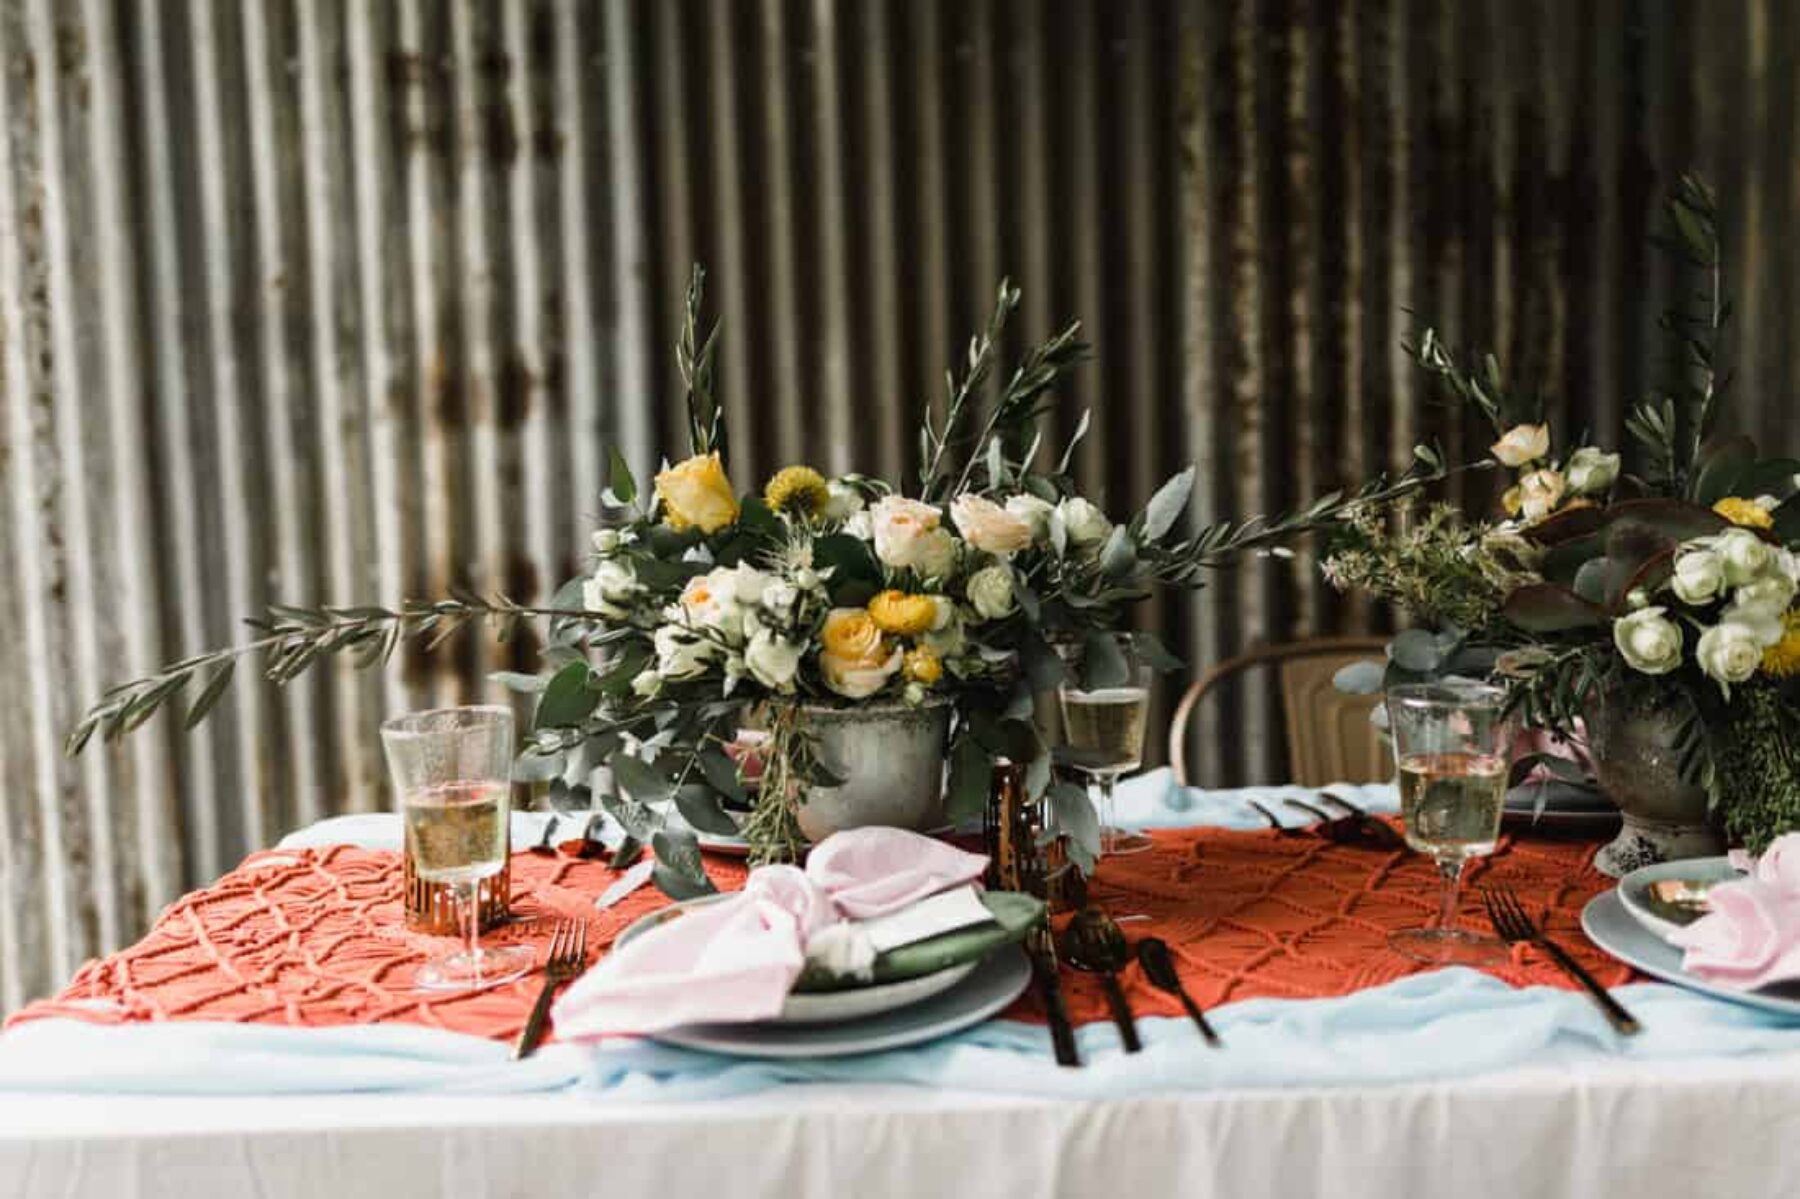 rustic tablescape with macrame runner